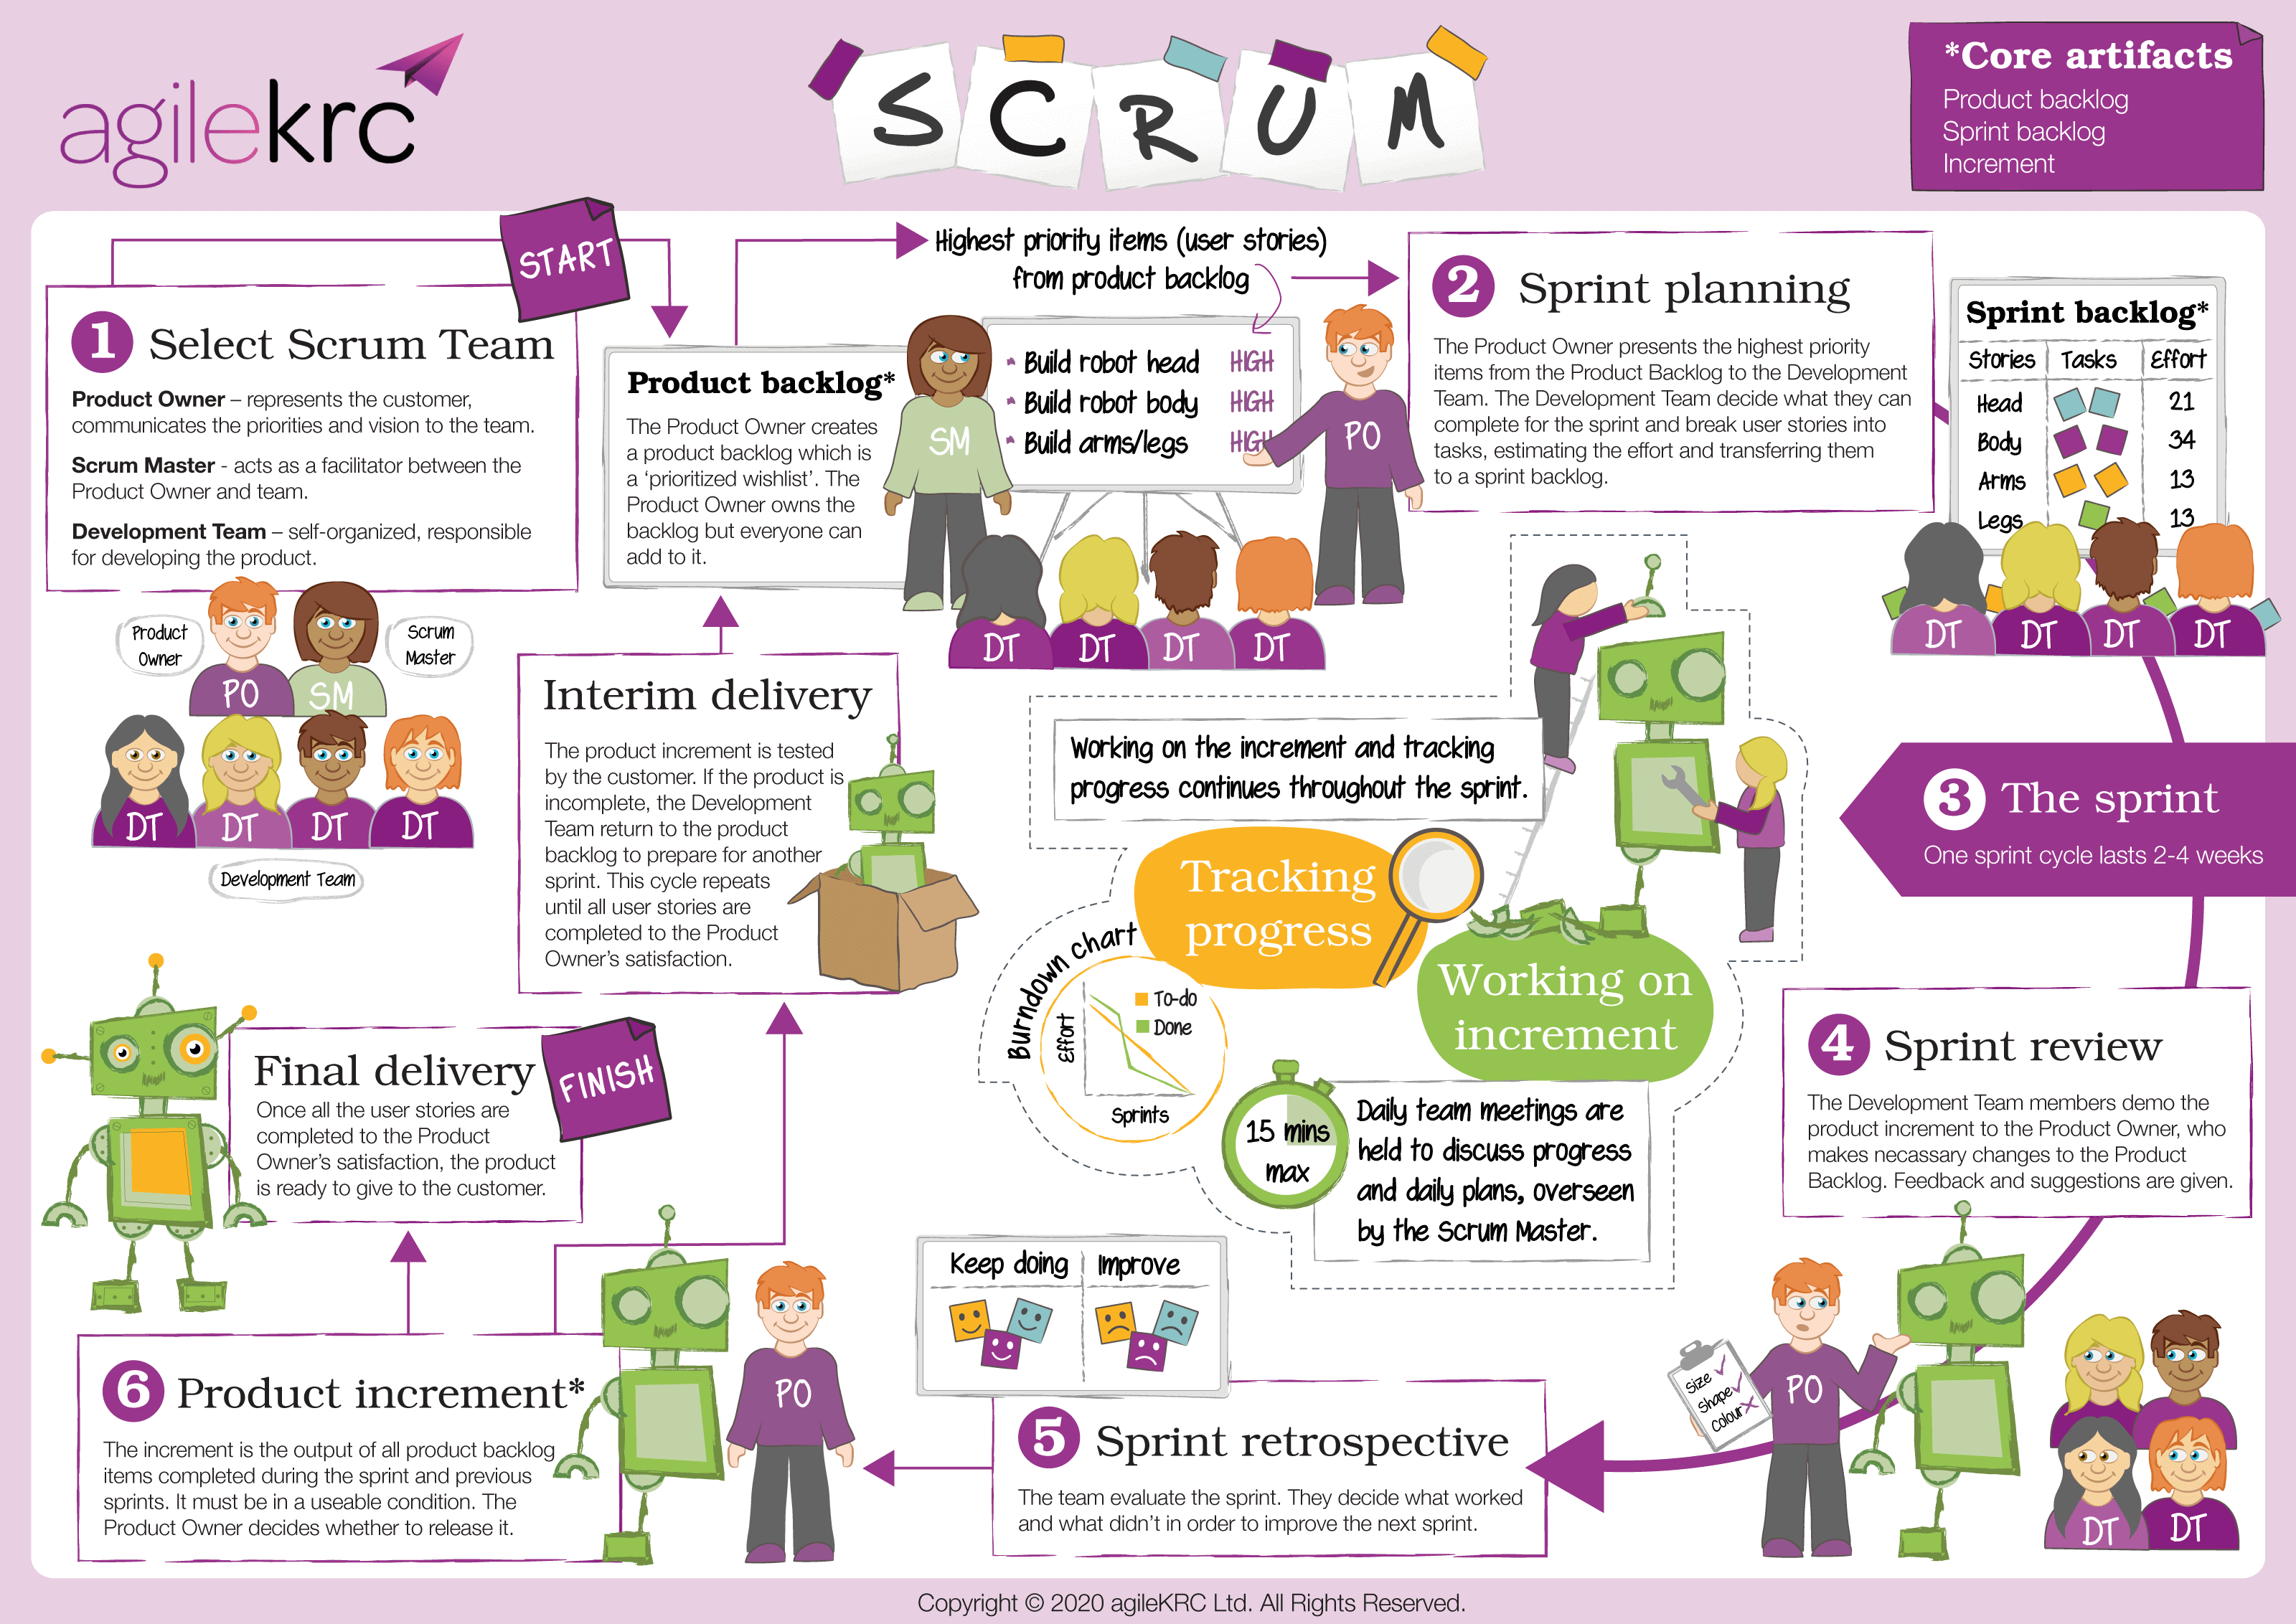 What is scrum